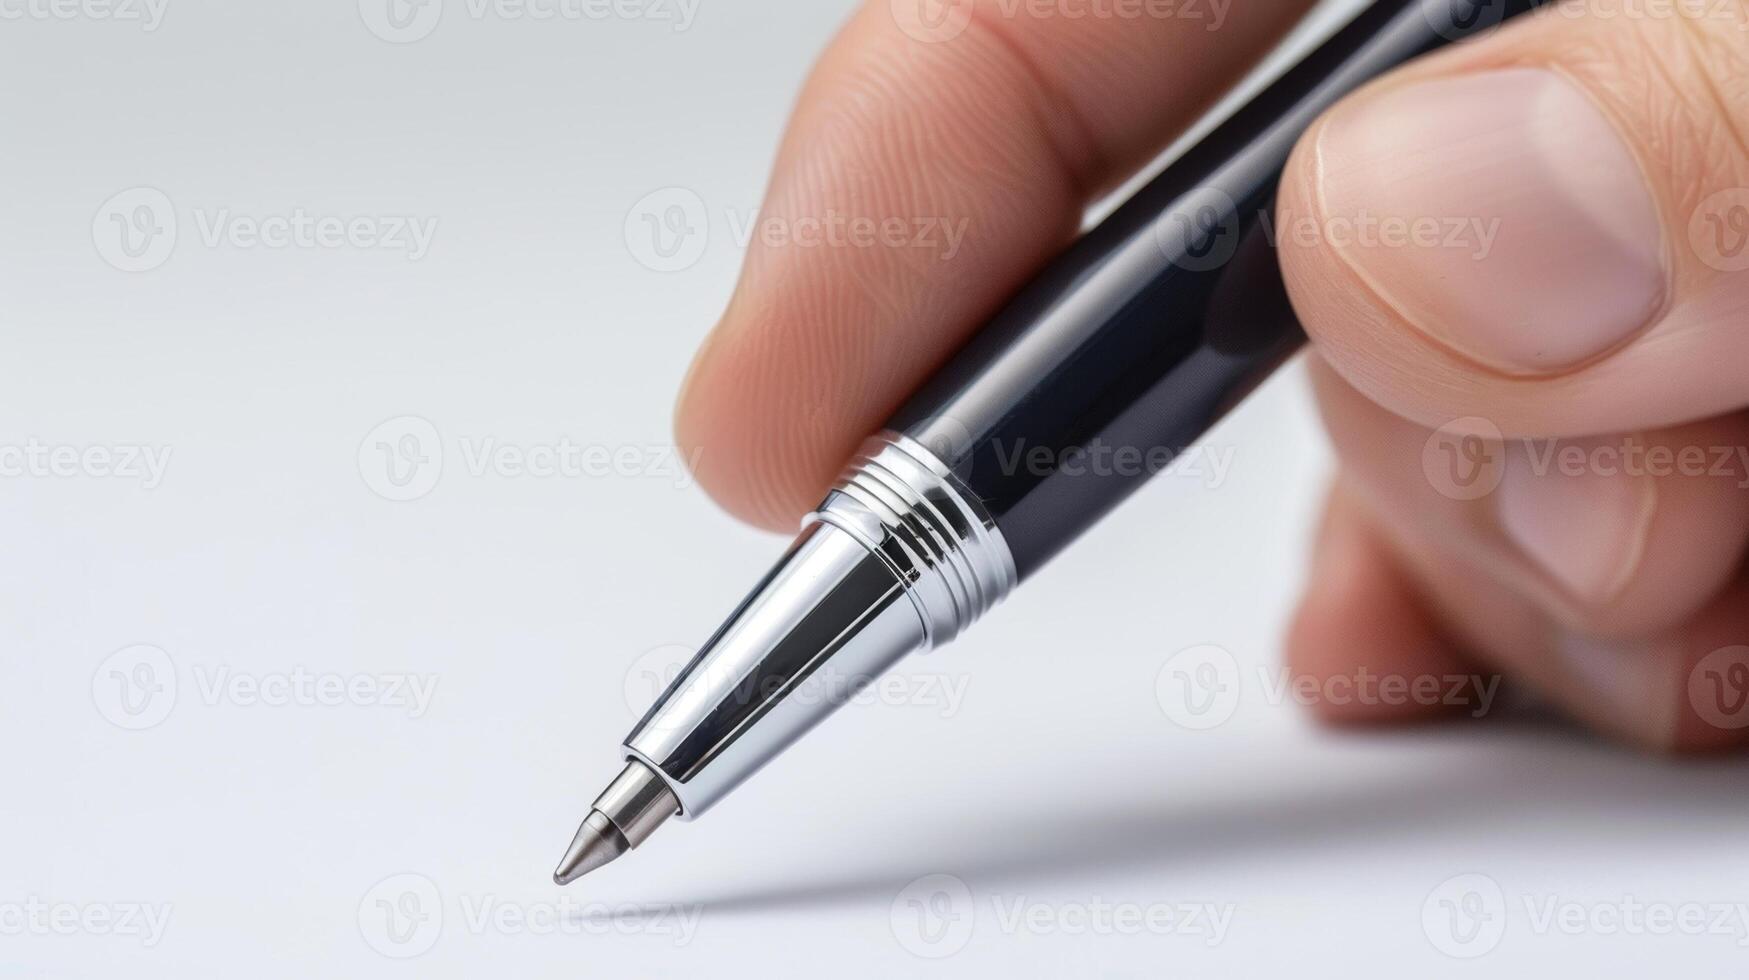 The weight of the pen feels just right in the hand providing a comfortable and steady grip for endless hours of writing photo